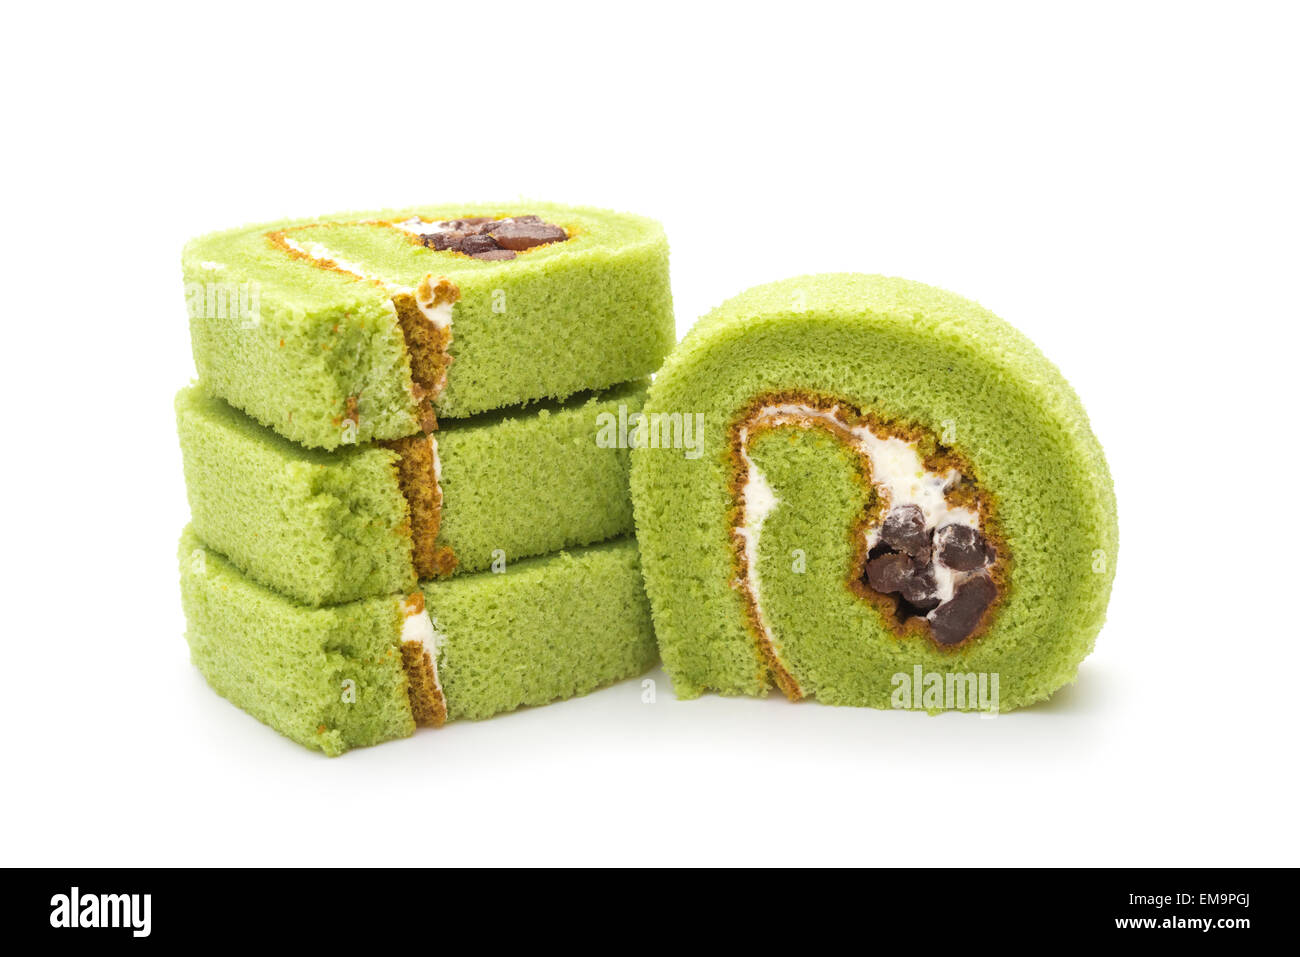 four pieces of yummy cake made by green tea and mung bean on a white background Stock Photo